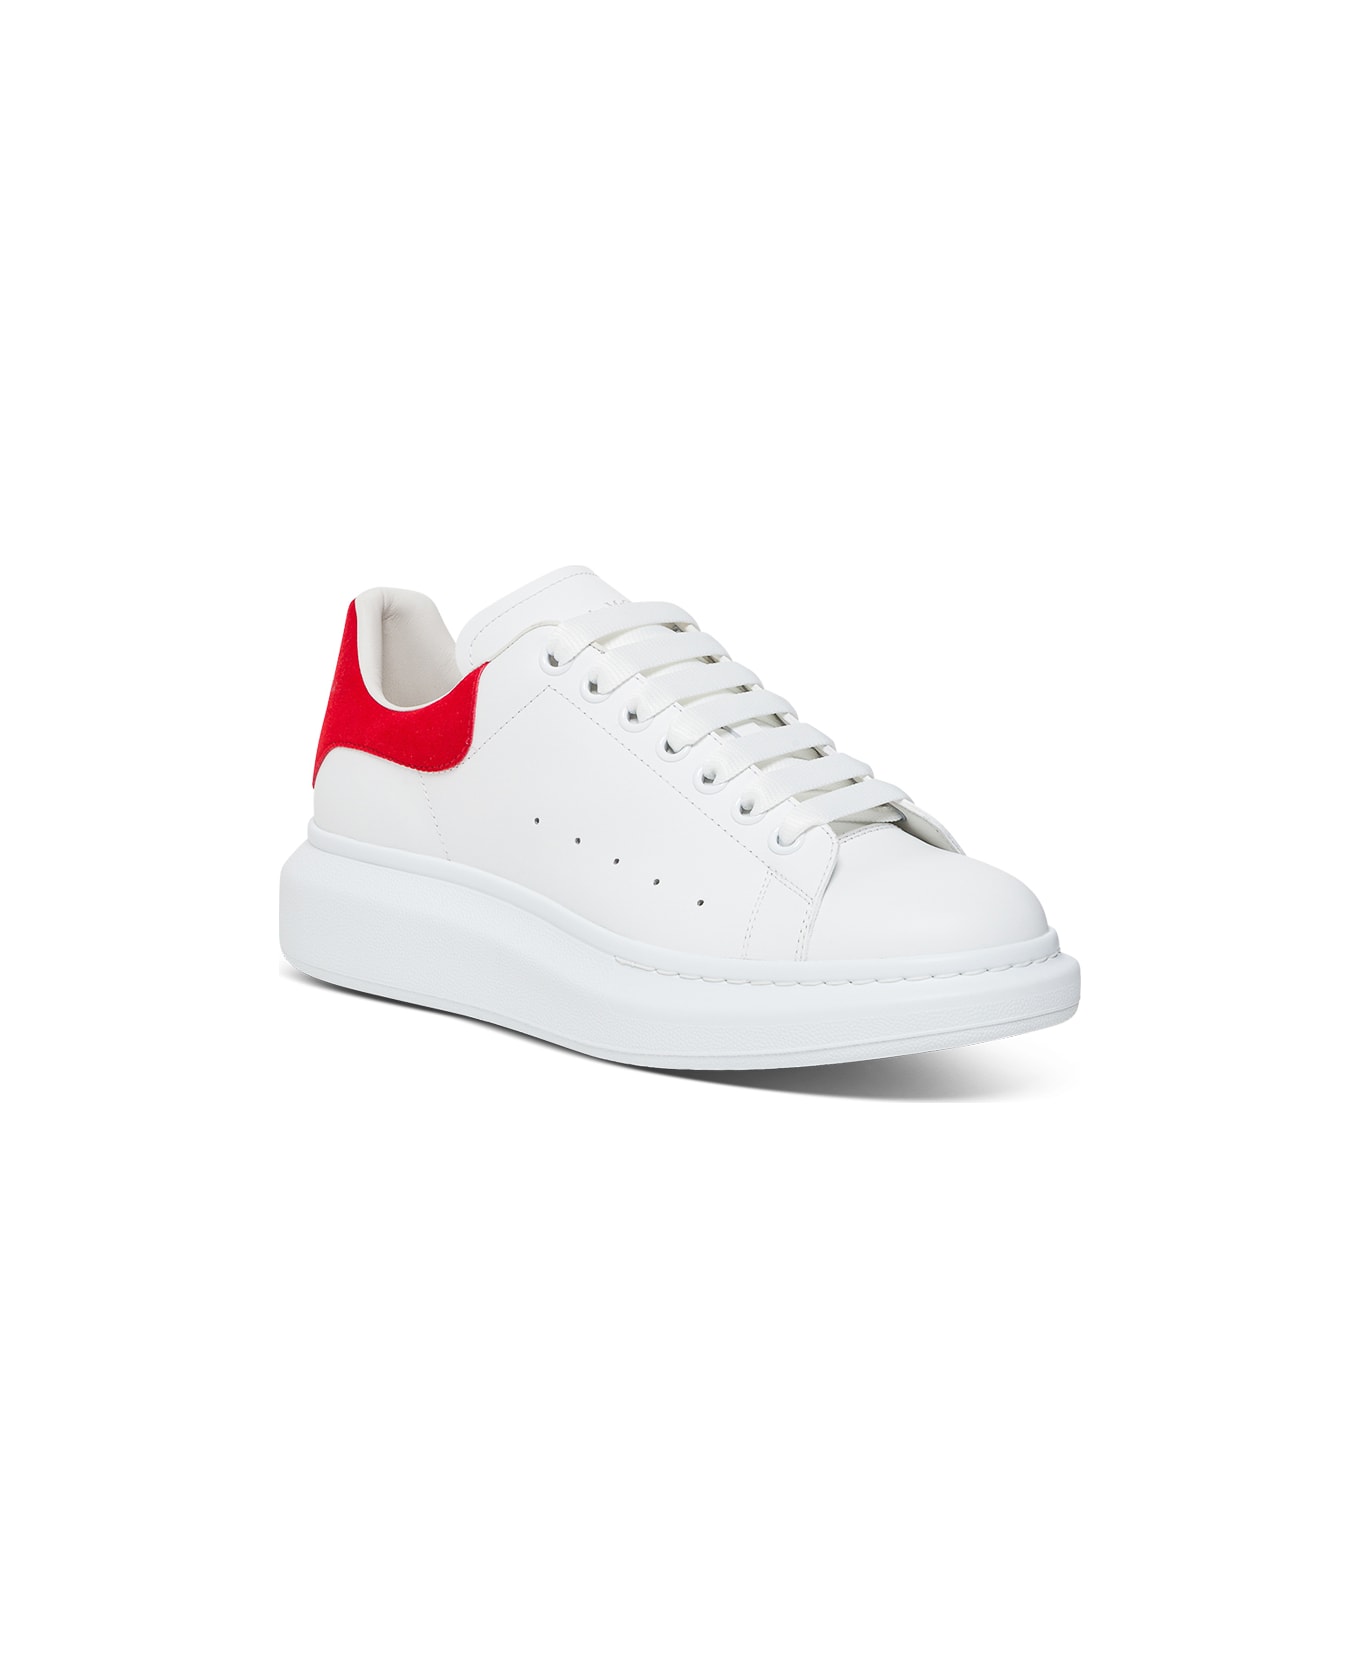 Alexander McQueen Oversize  White Leather Sneakers - White